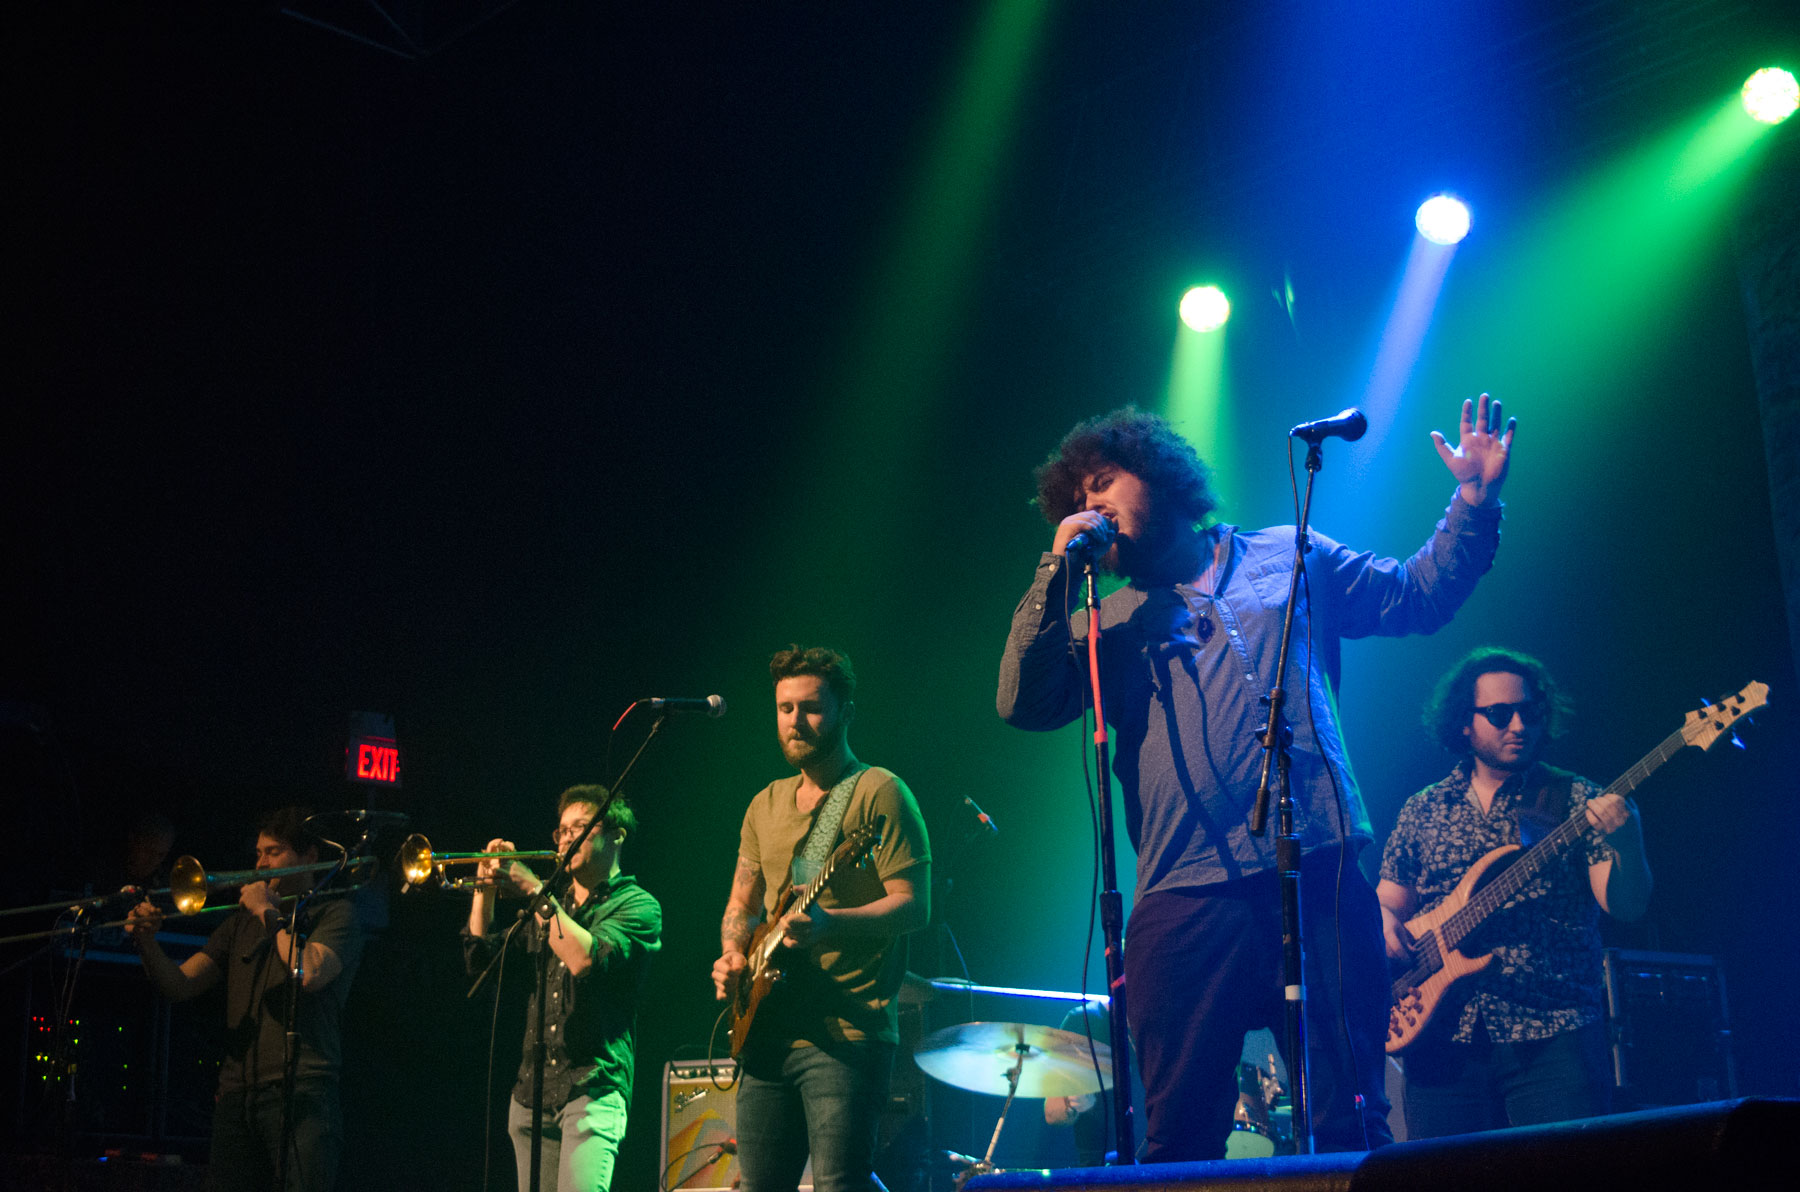 Ripe's funky fresh performance at the Electric Factory had everyone in the crowd moving to their catchy originals and stellar covers. (Photo: Matthew Coakley, The Triangle)